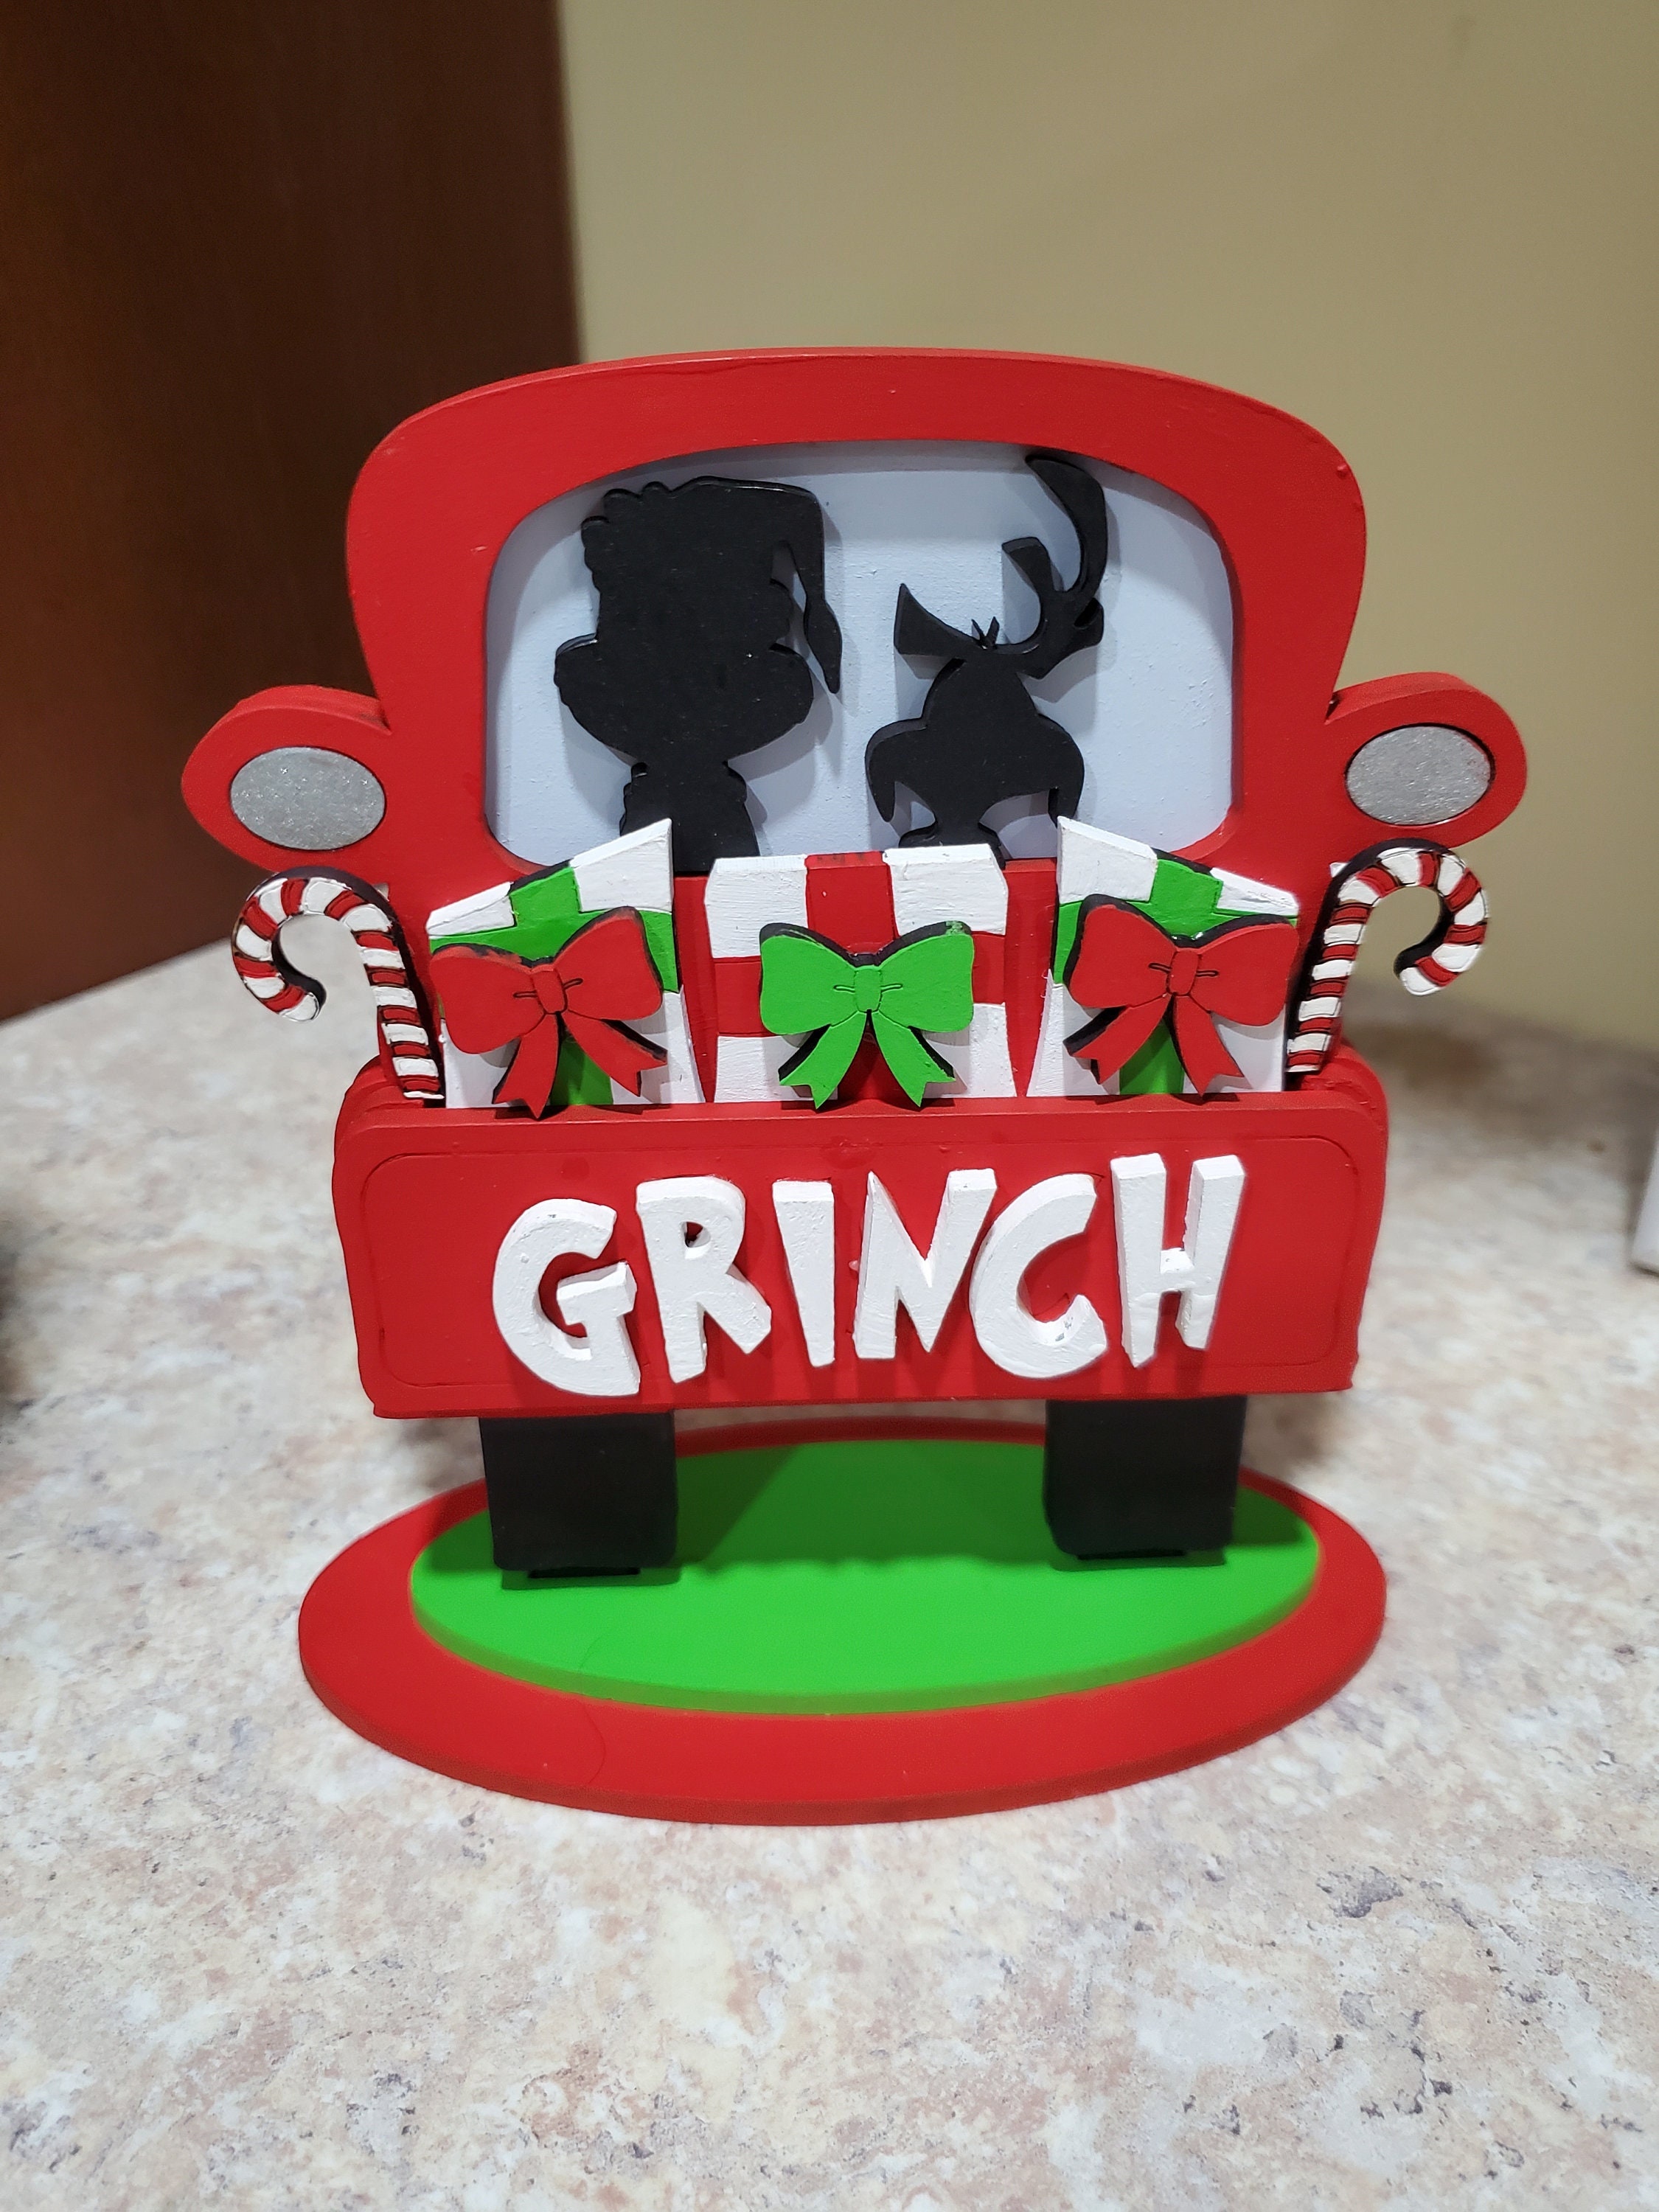 Merry Christmas Grinch Truck ornament